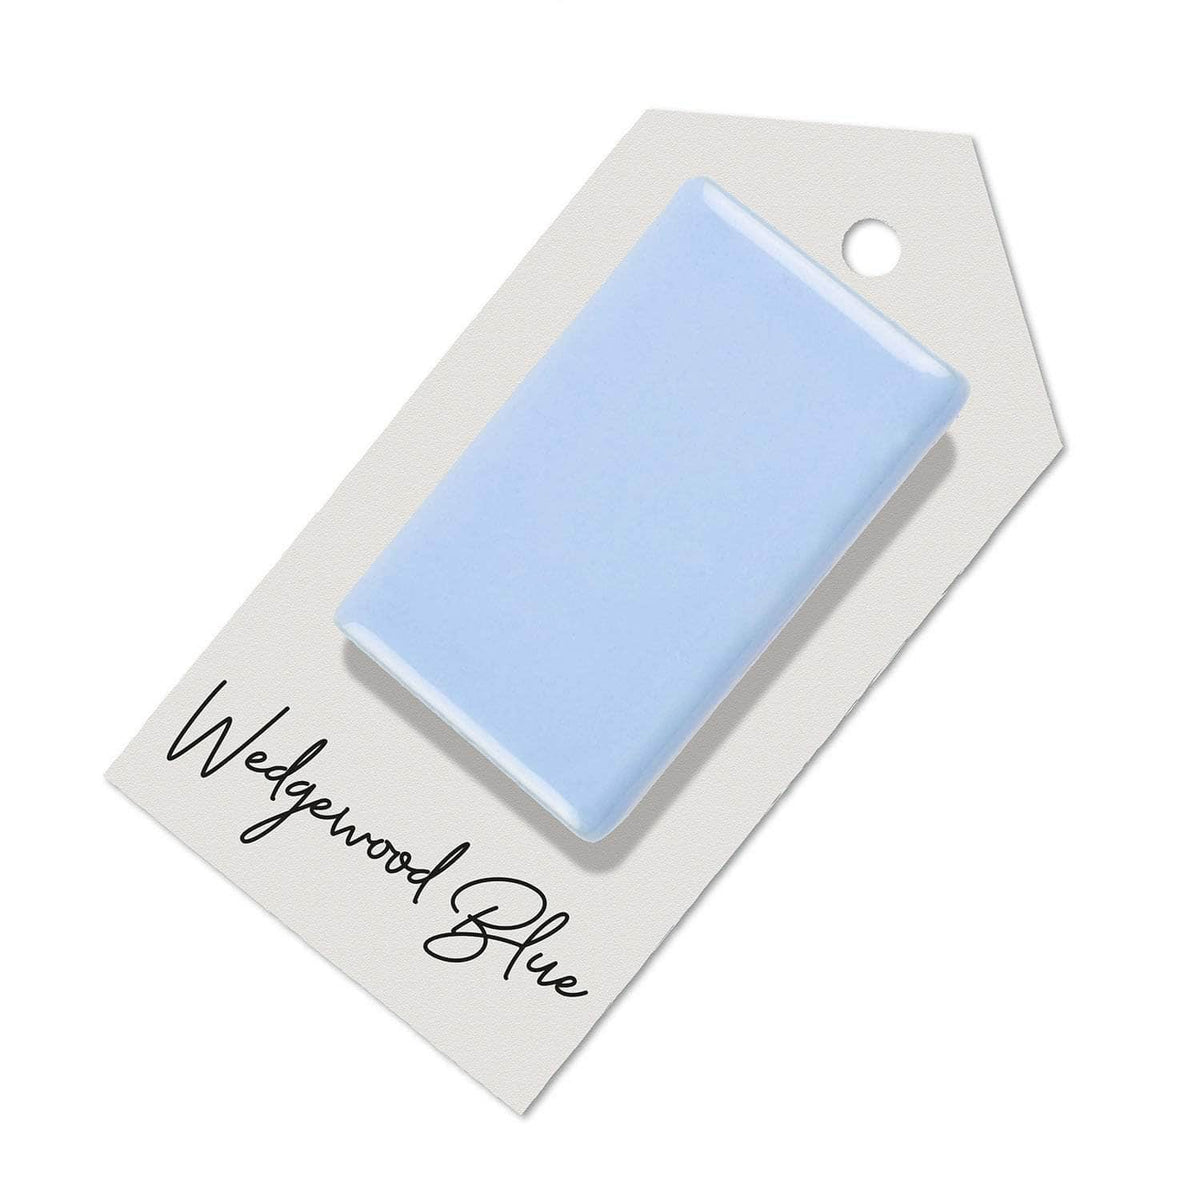 Wedgewood Blue sample for Aga range cooker re-enamelling &amp; reconditioned cookers